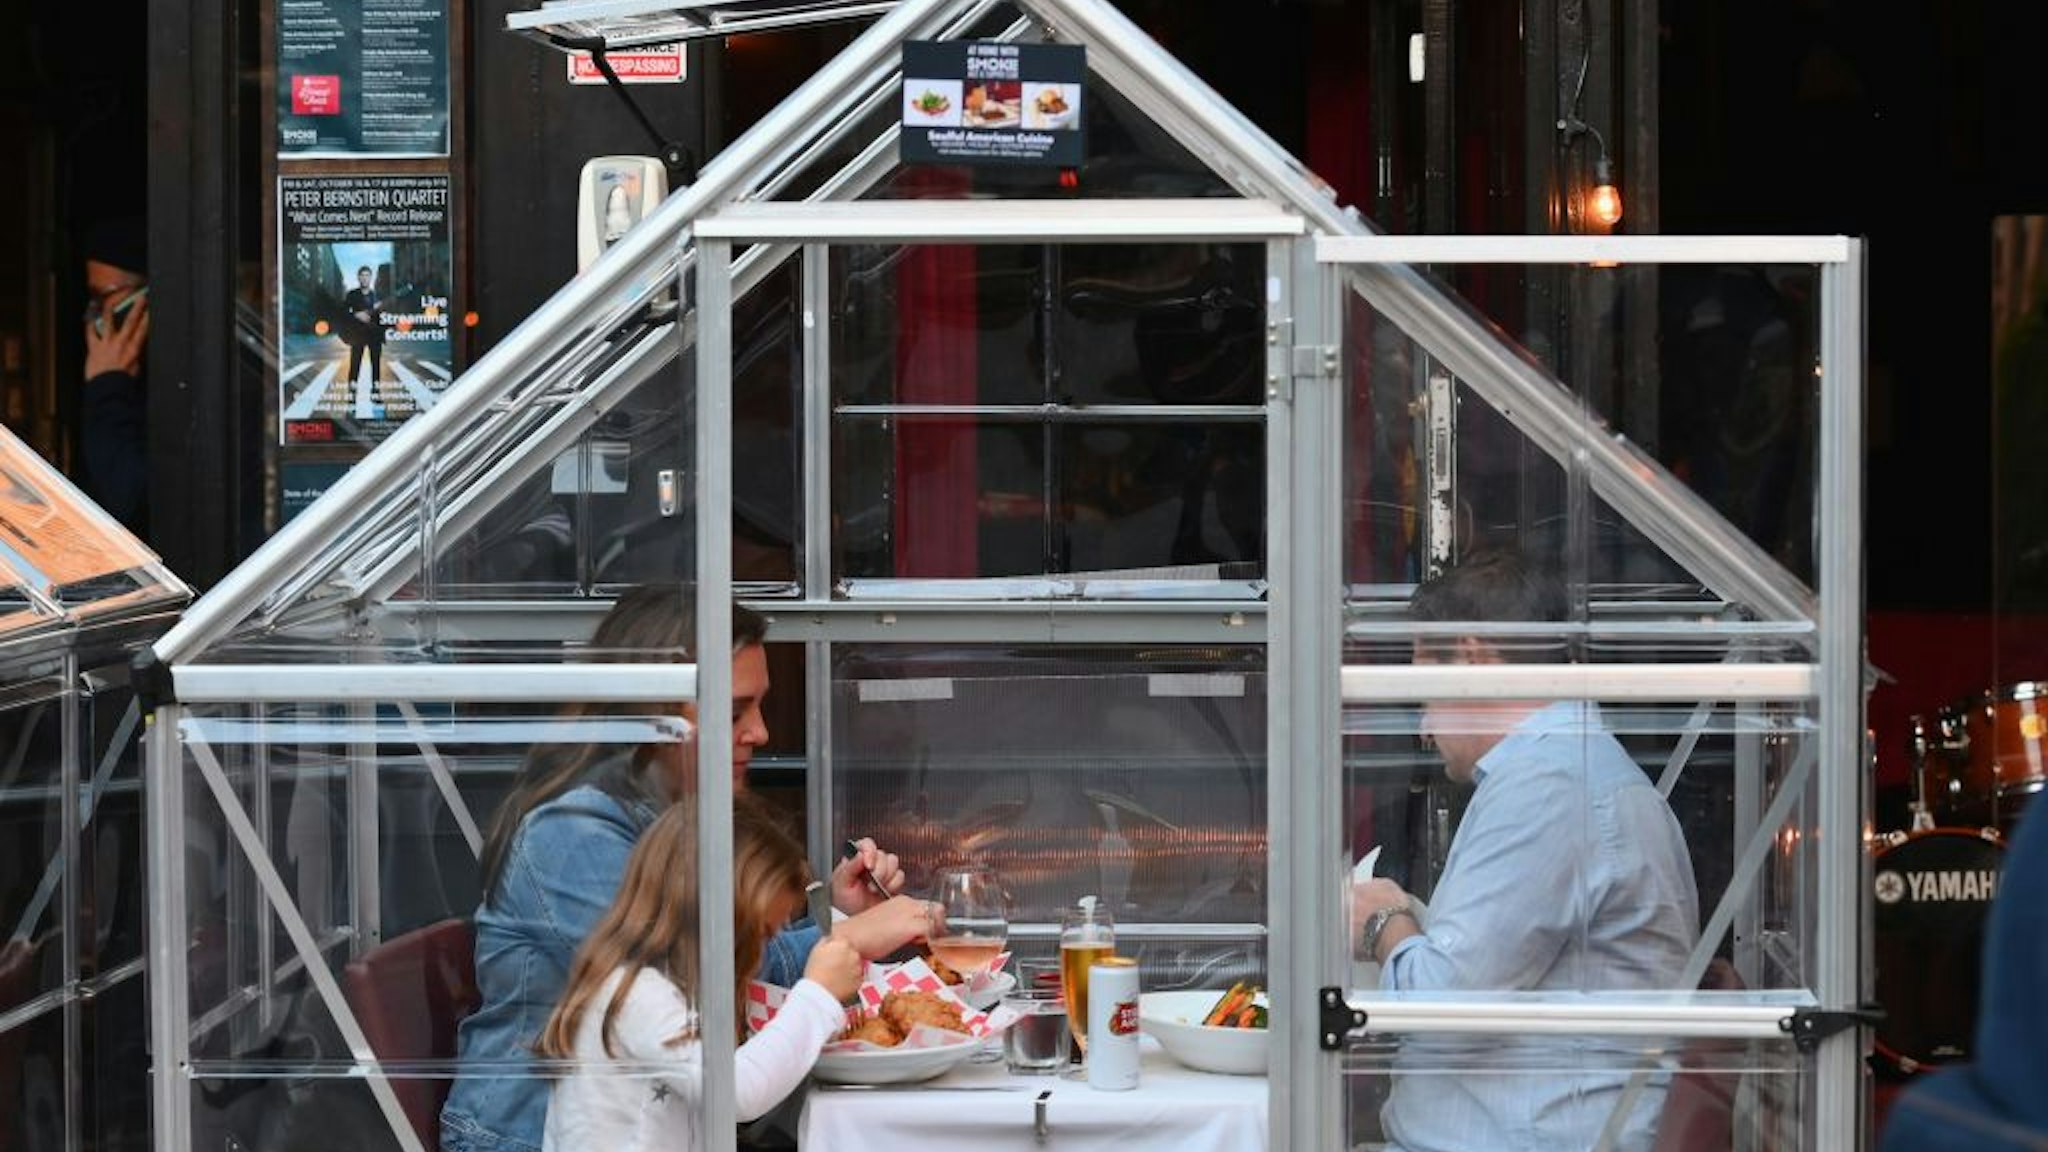 TOPSHOT - People dine in plastic tents for social distancing at a restaurant in Manhattan on October 15, 2020 in New York City, amid the coronavirus pandemic. (Photo by Angela Weiss / AFP) (Photo by ANGELA WEISS/AFP via Getty Images)